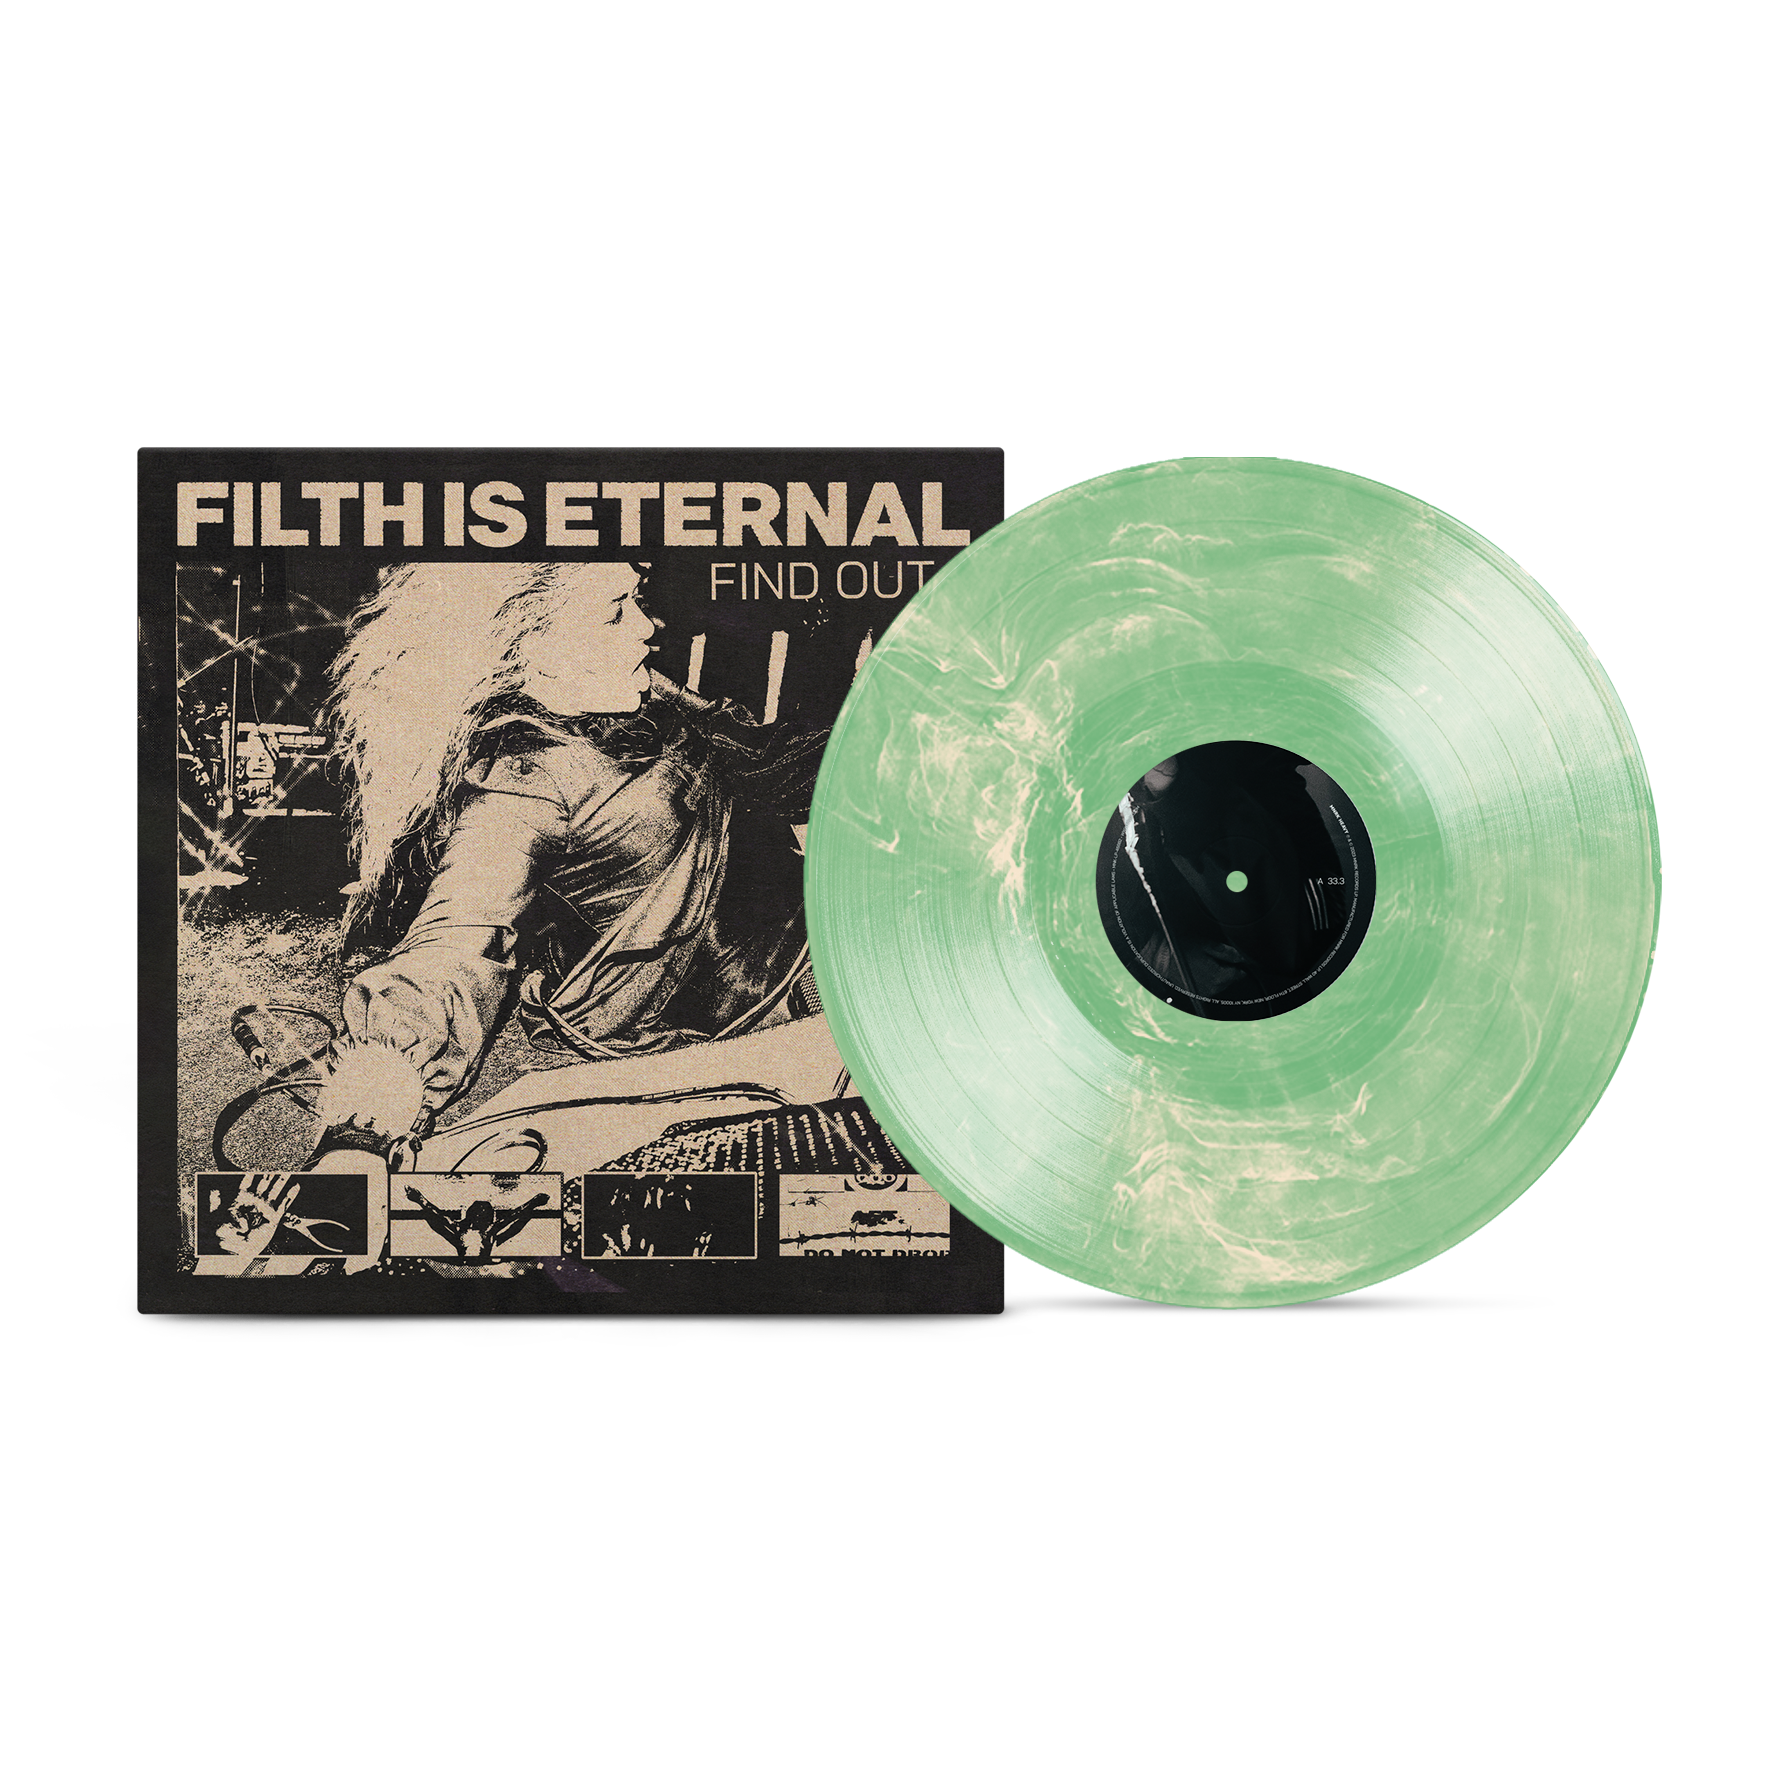 Filth Is Eternal Debut album Find Out on MNRK Heavy